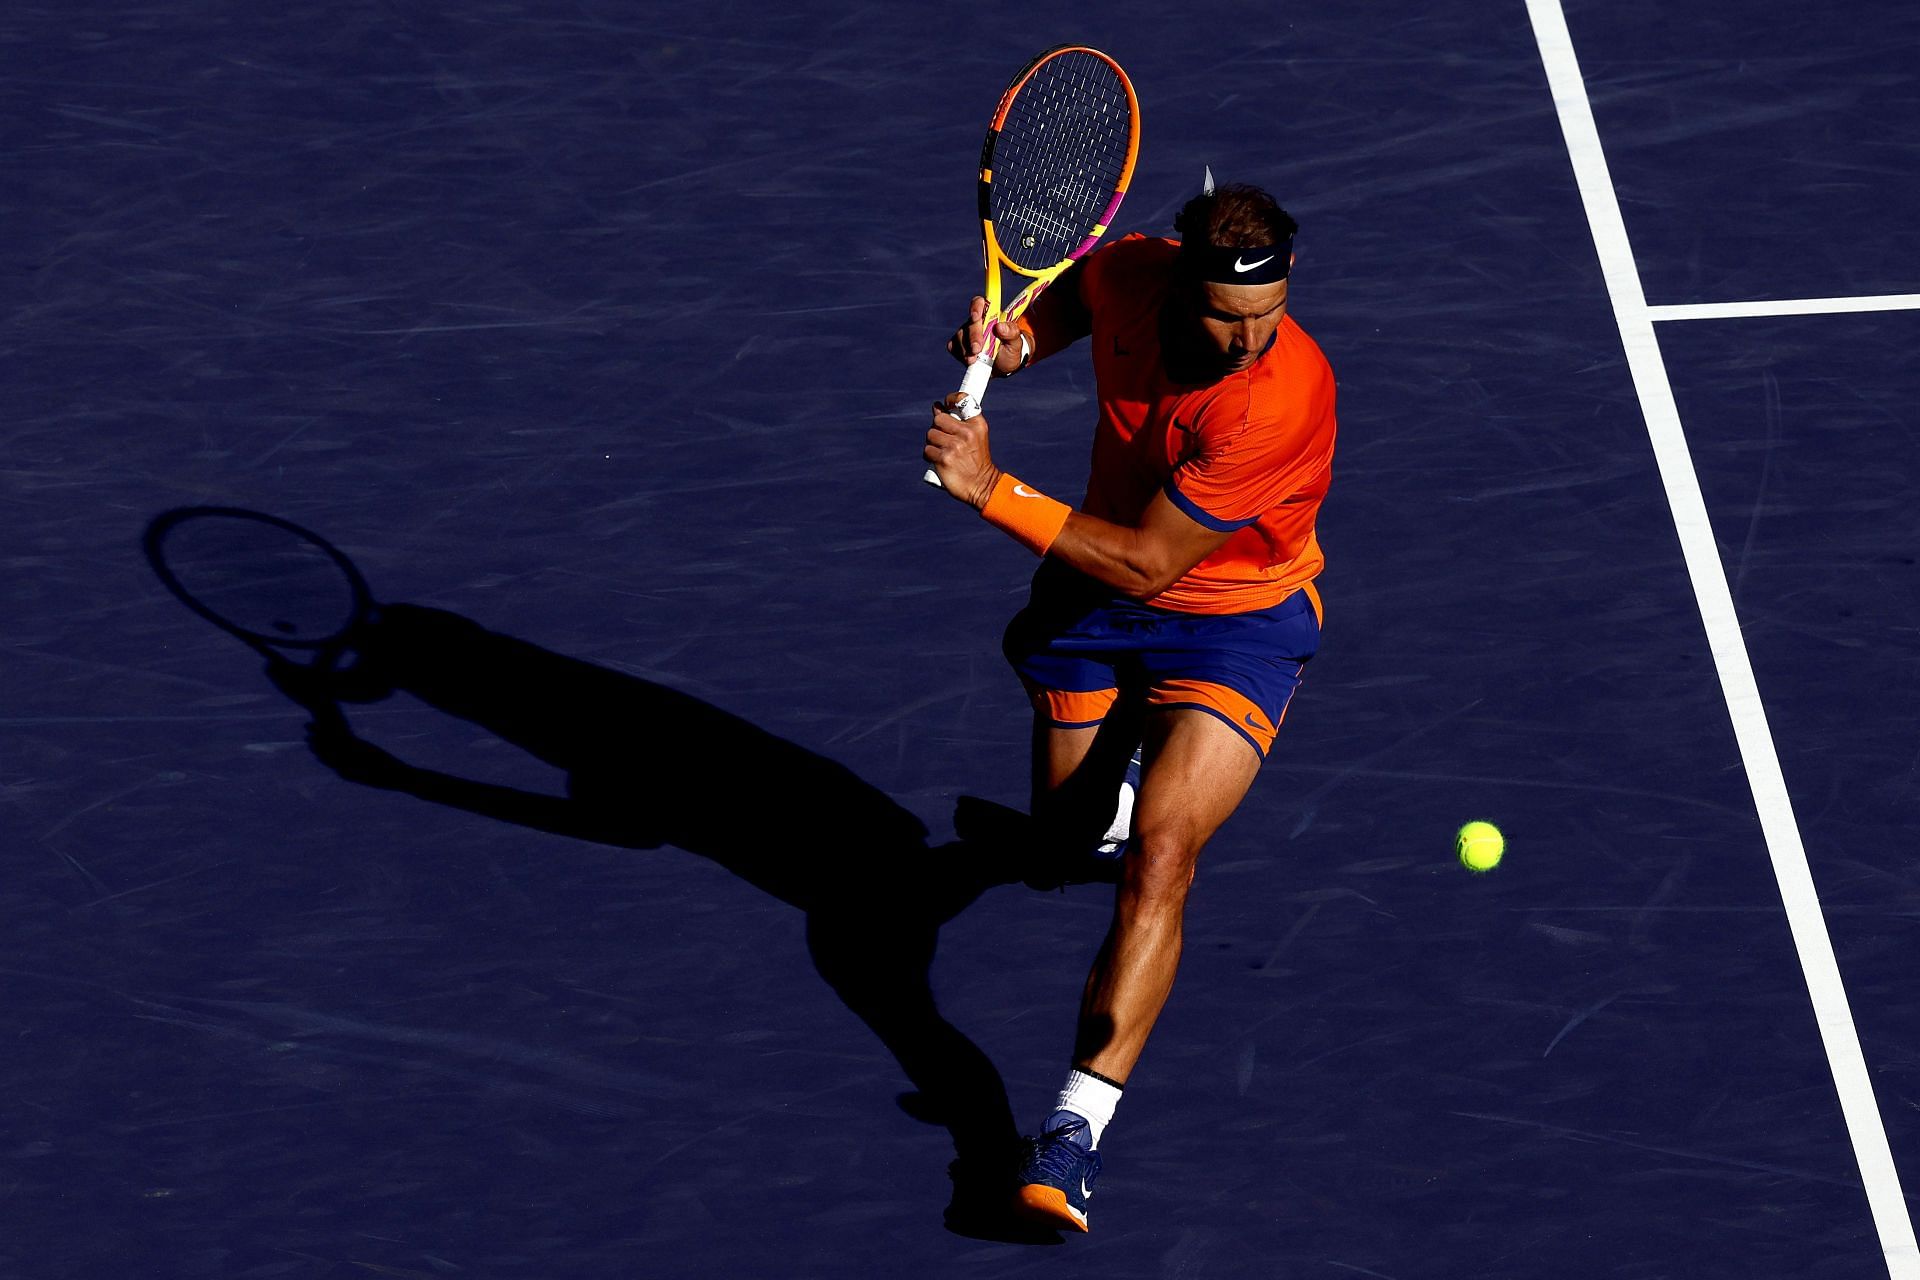 Rafael Nadal takes on compatriot Carlos Alcaraz in the semifinals of the Indian Wells Masters